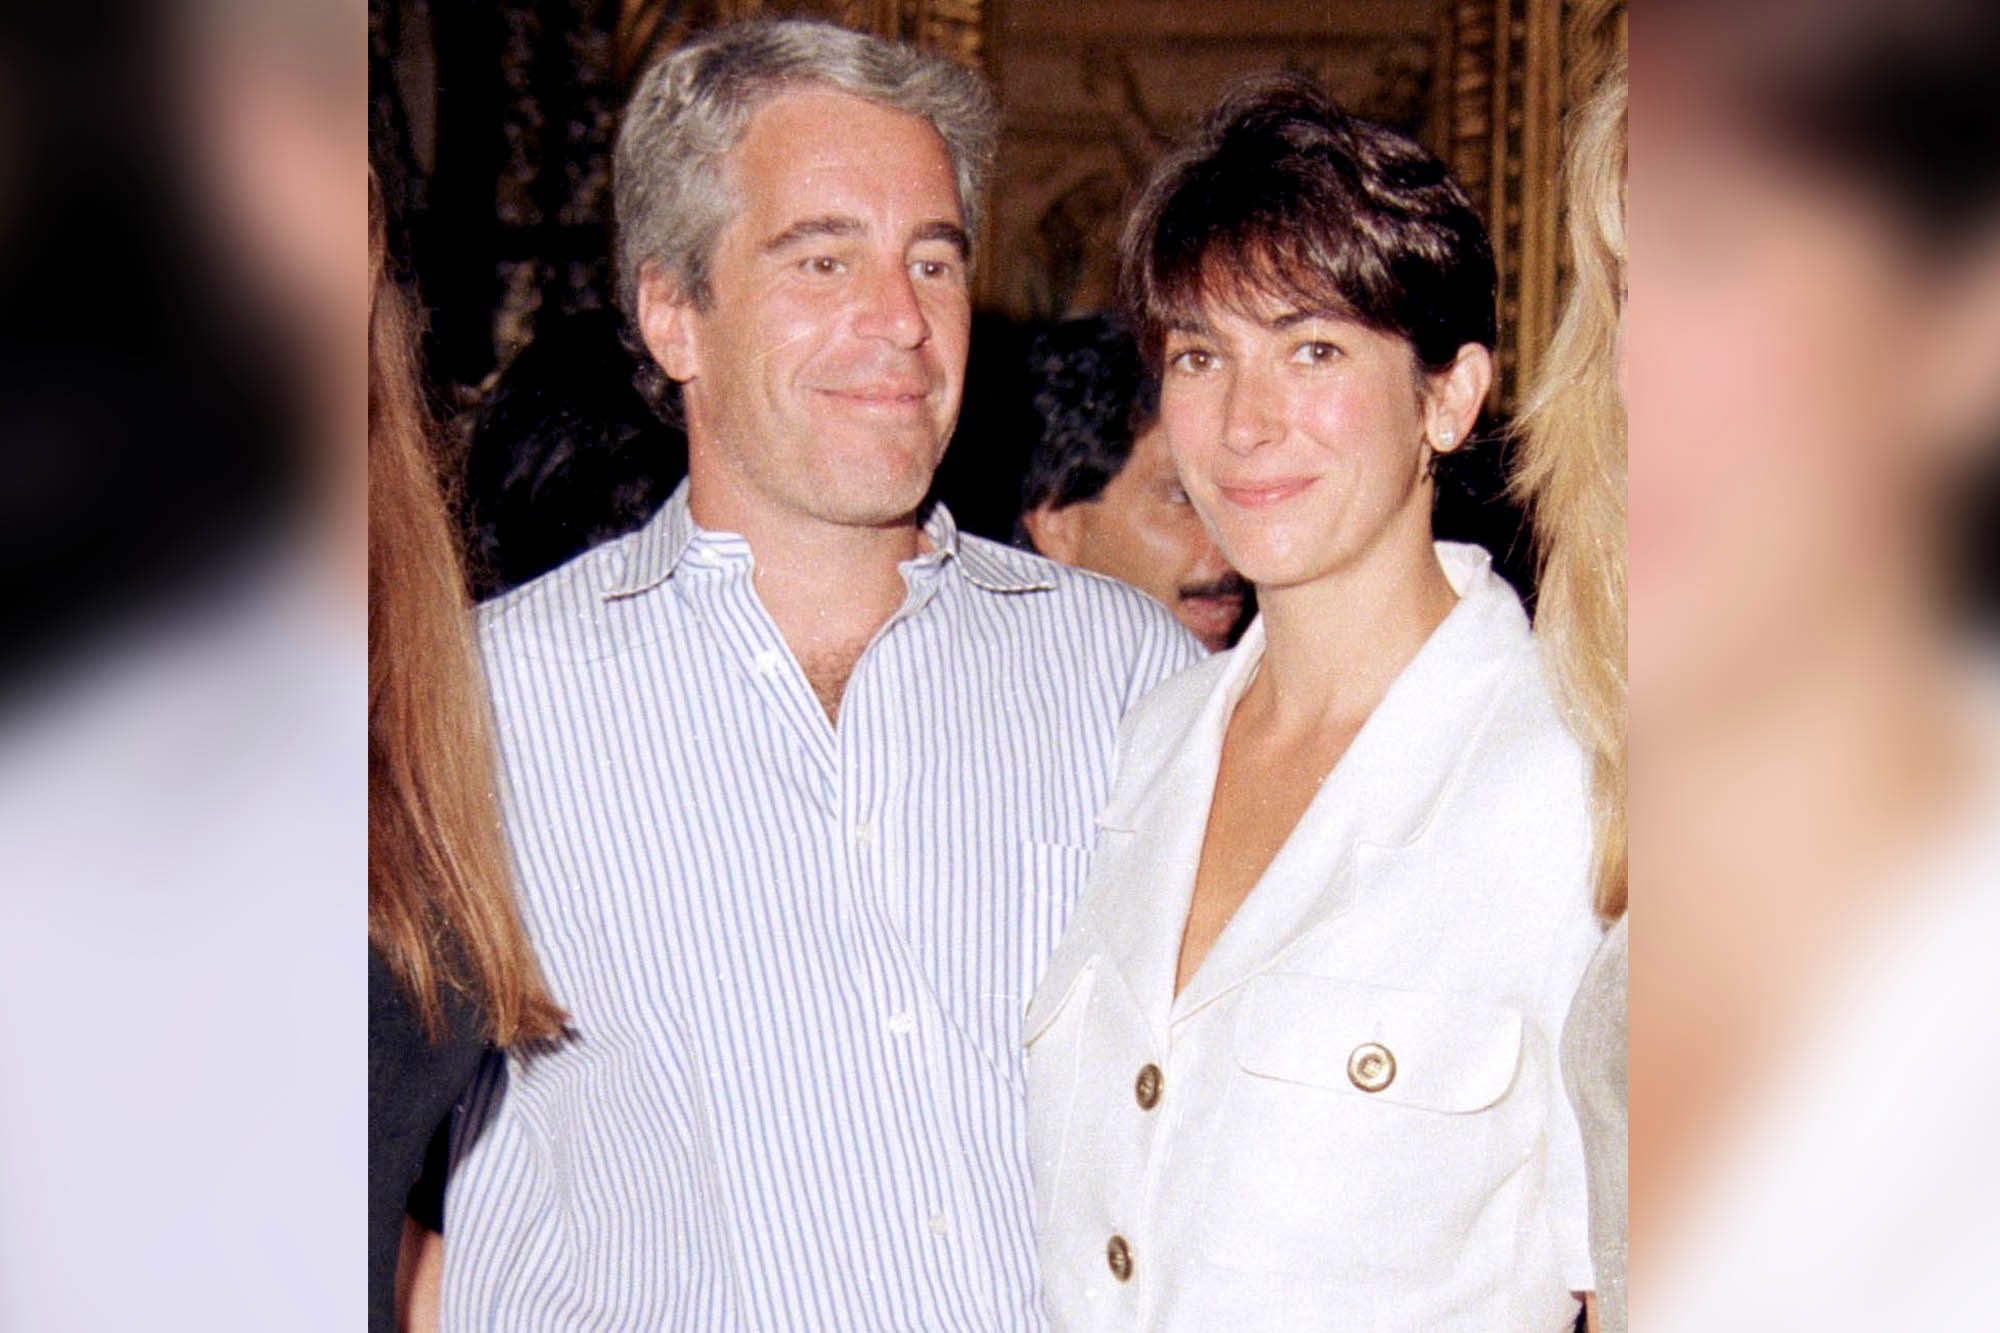 Where did Ghislaine Maxwell tell her quot victim quot to quot give Jeffrey what he